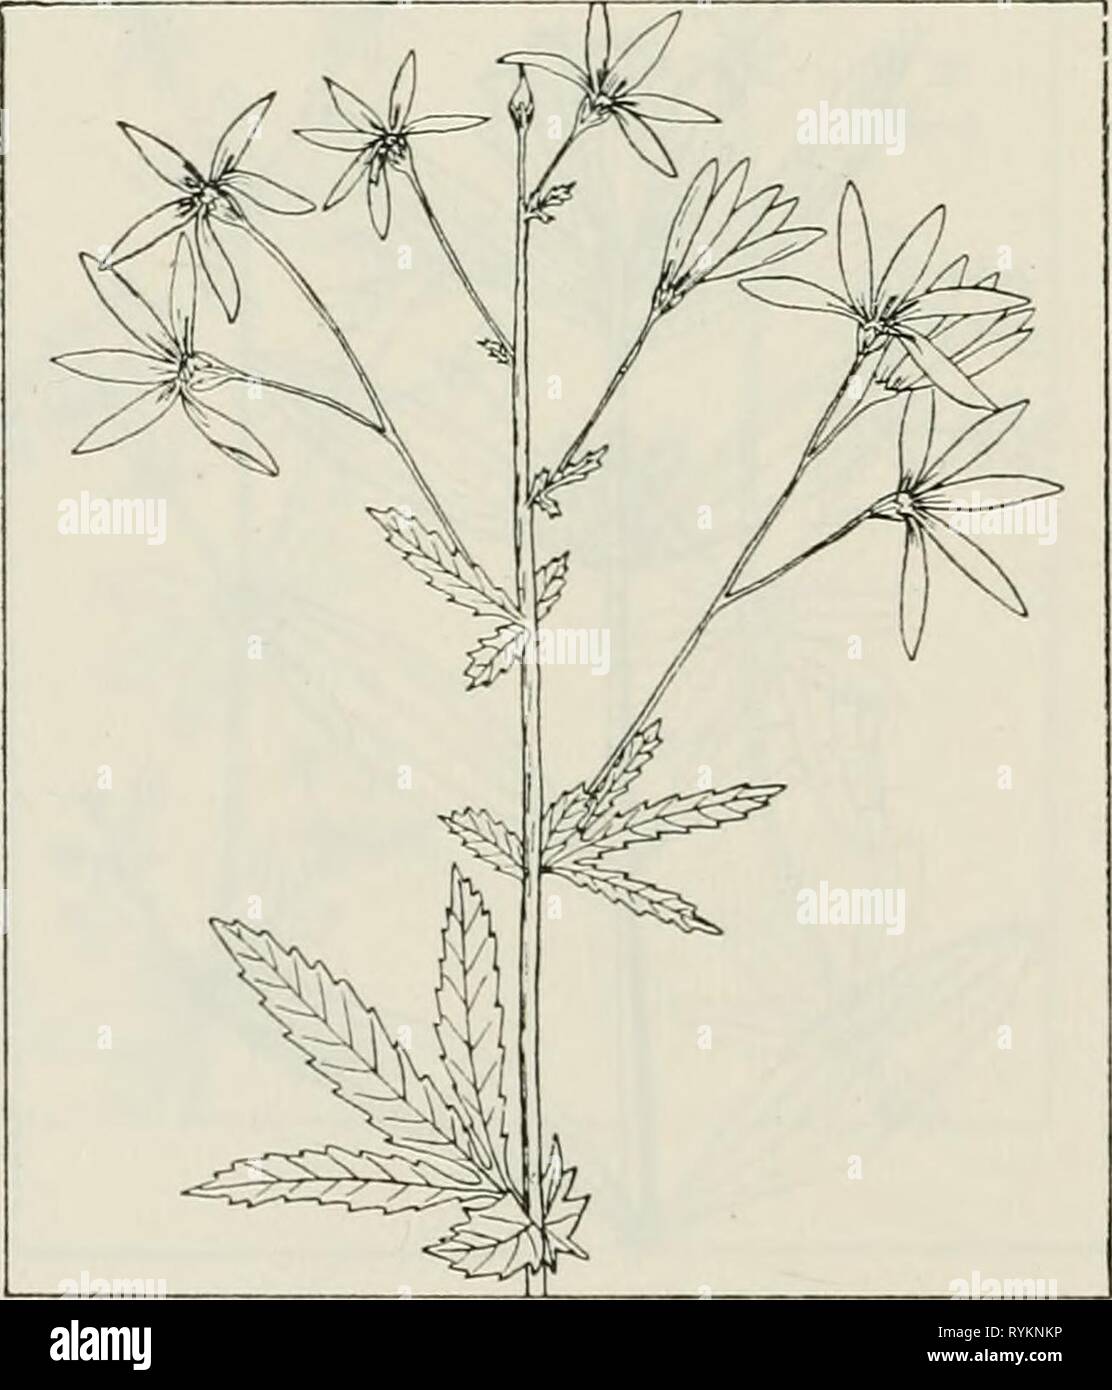 The drug plants of Illinois  drugplantsofilli44teho Year: 1951  GERANIUM MAGULATUM L. Granesbill, wild geranium, alum root. Geraniaceae.—An upright and sparingly branched, hairy herb 1 to 2 feet tall, per- ennial; rootstock (rhizome) 2 to 4 inches long, thick, with numerous scars from previous years' growths; stem slender, hairy; leaves palmately 3- to 5-parted and the divisions cleft and toothed, mostly basal, long-petioled, 3 to 6 inches wide, usually 2 or more forming an involucre; flowers rose- or violet-purple, 1 to II/2 inches wide, in loose, long-stalked clusters terminating the stems;  Stock Photo